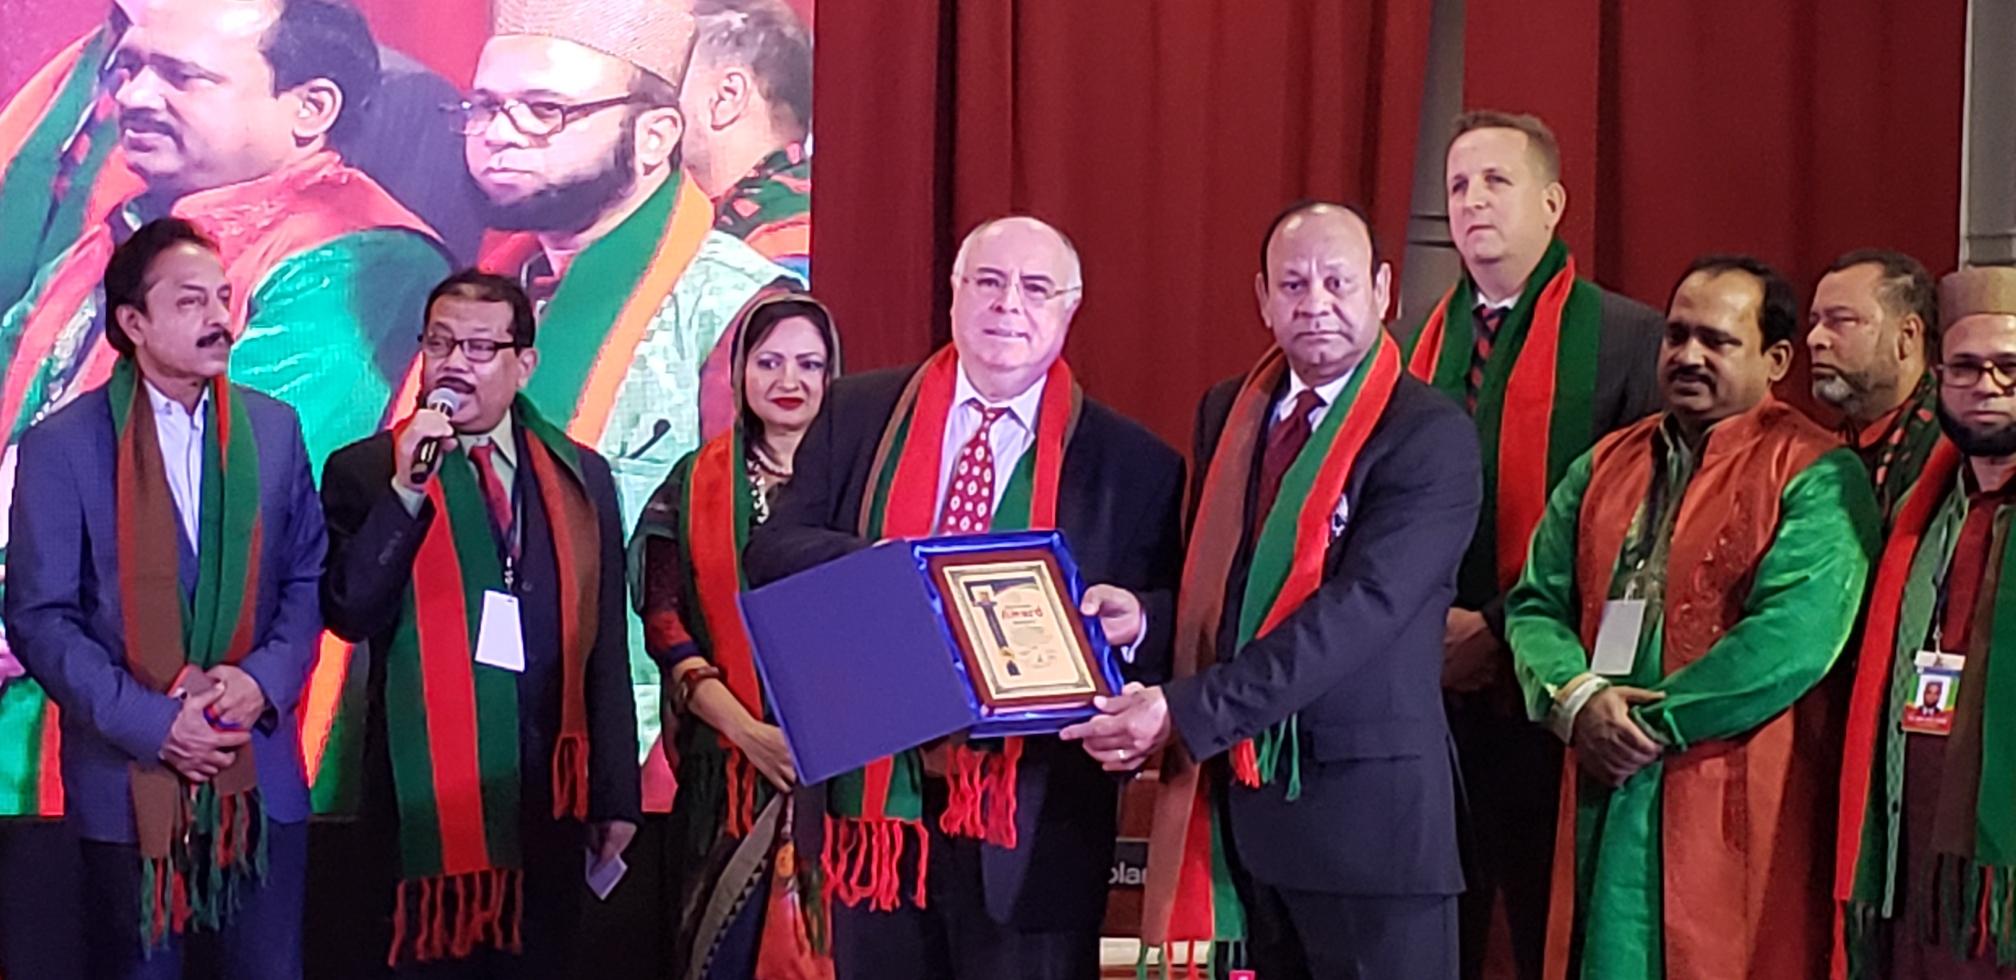 Recognition Award from the Bengaly Society